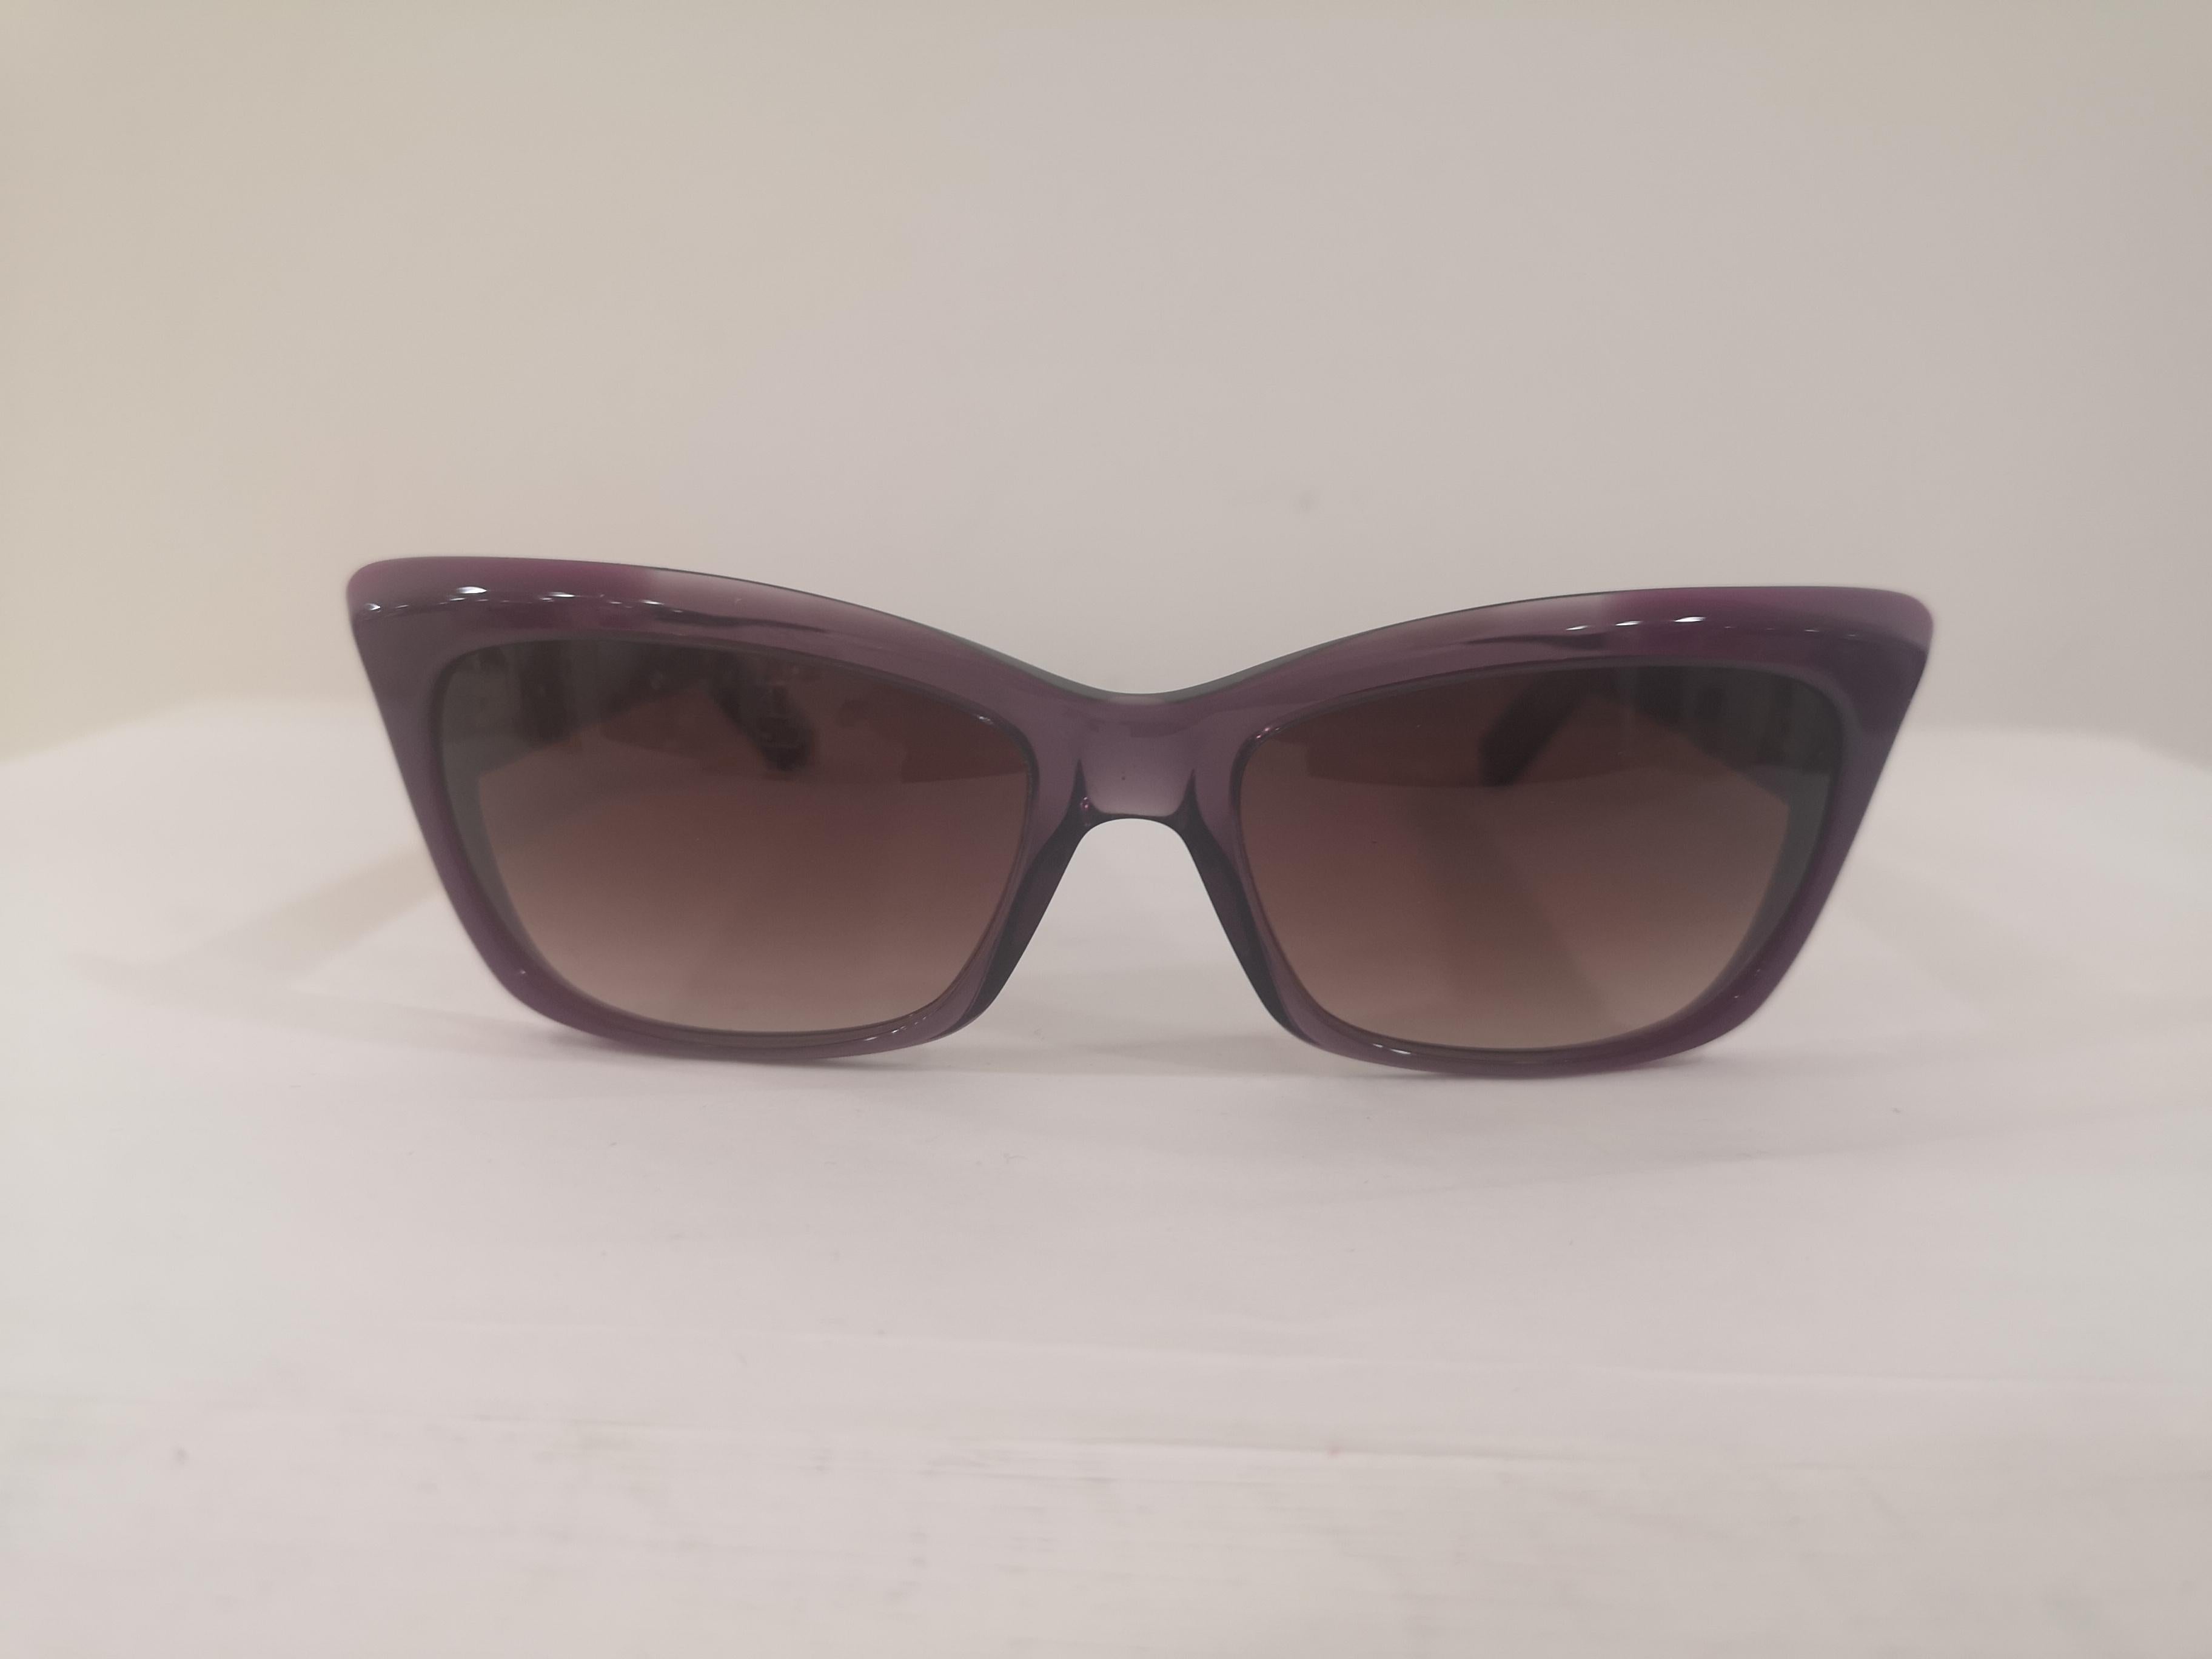 Yves Saint LAurent Purple sunglasses NWOT
totally made in italy